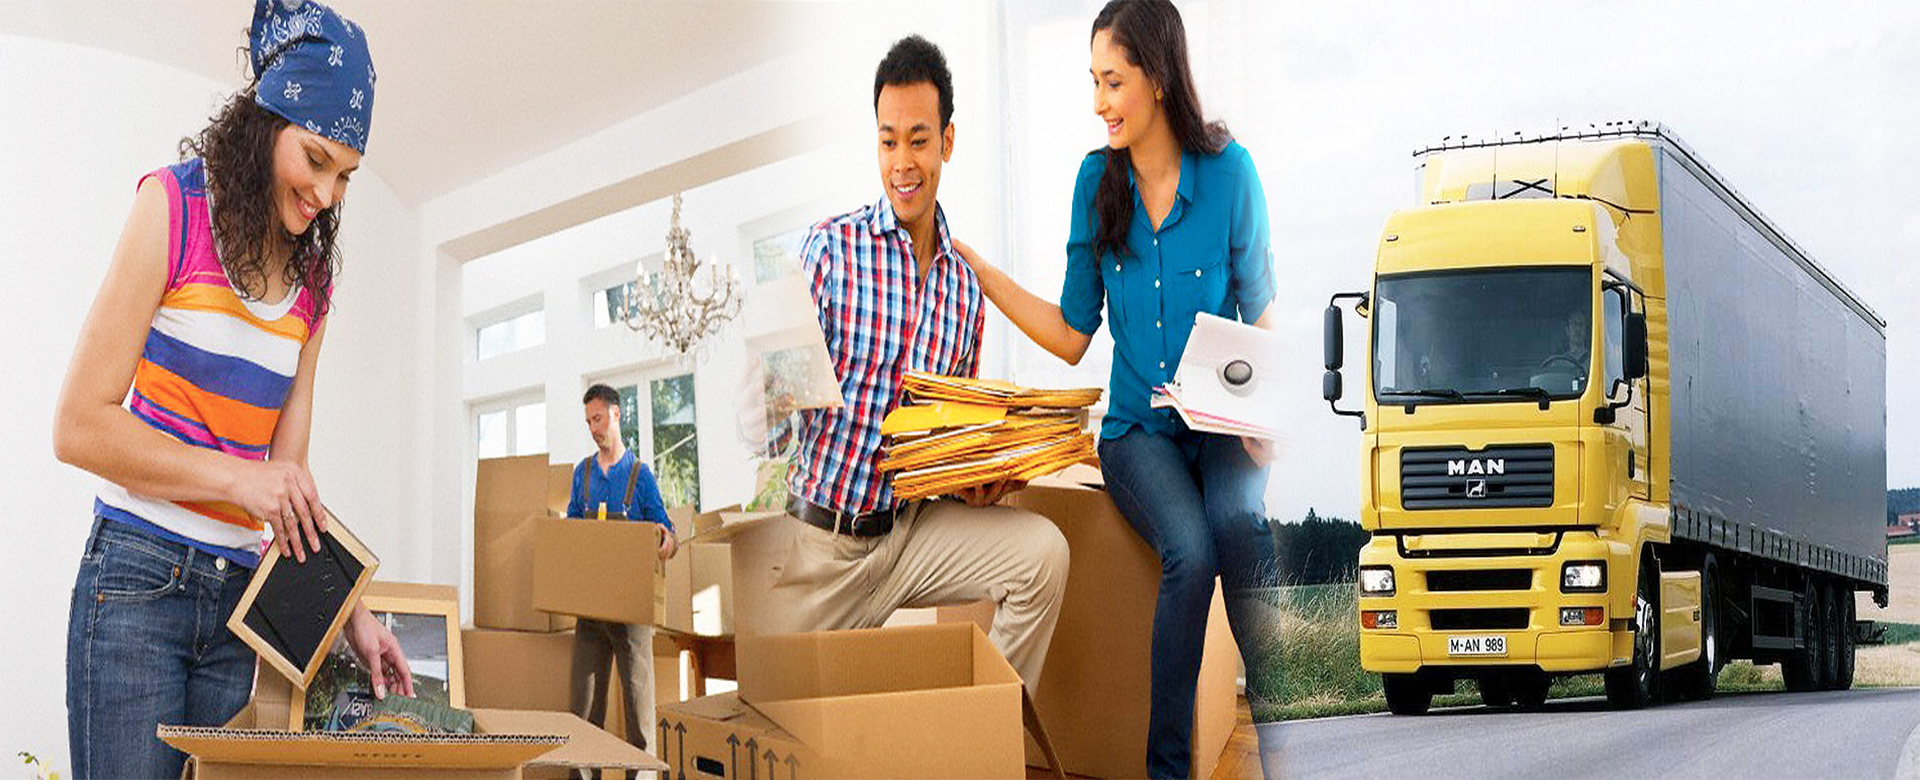 Packing and Moving Services Jacksonville - New Chapters Moving